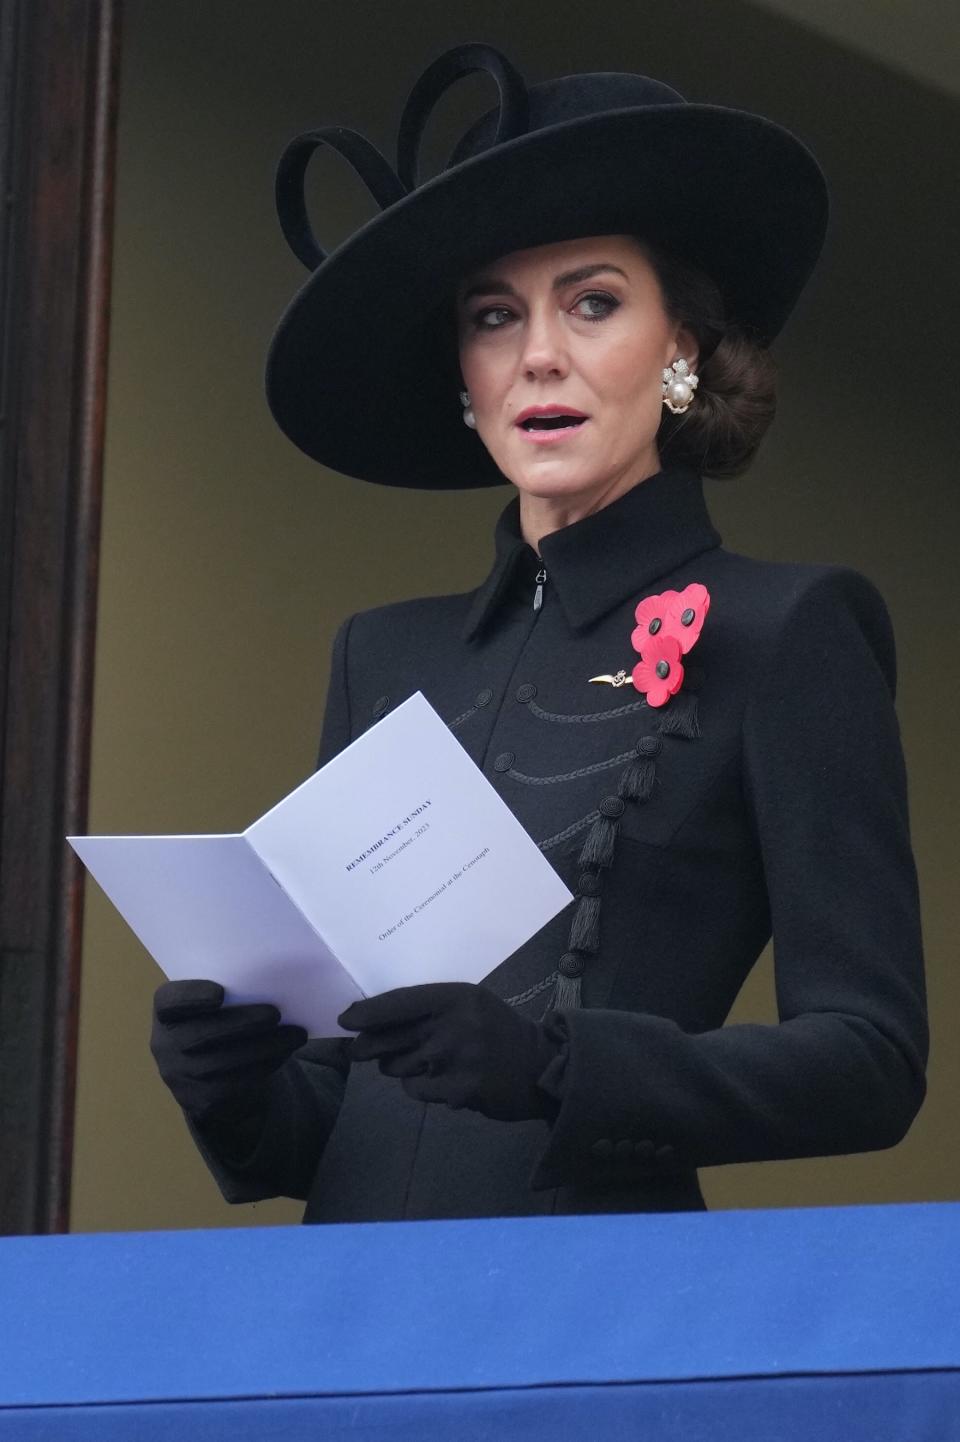 Kate Middleton, heels, high heels, hidden heels, black coat, embroidered coat, hat, pin, brooch, Remembrance Day, National Service of Remembrance, London, United Kingdom, Queen Camilla, royals, royal style, royal family